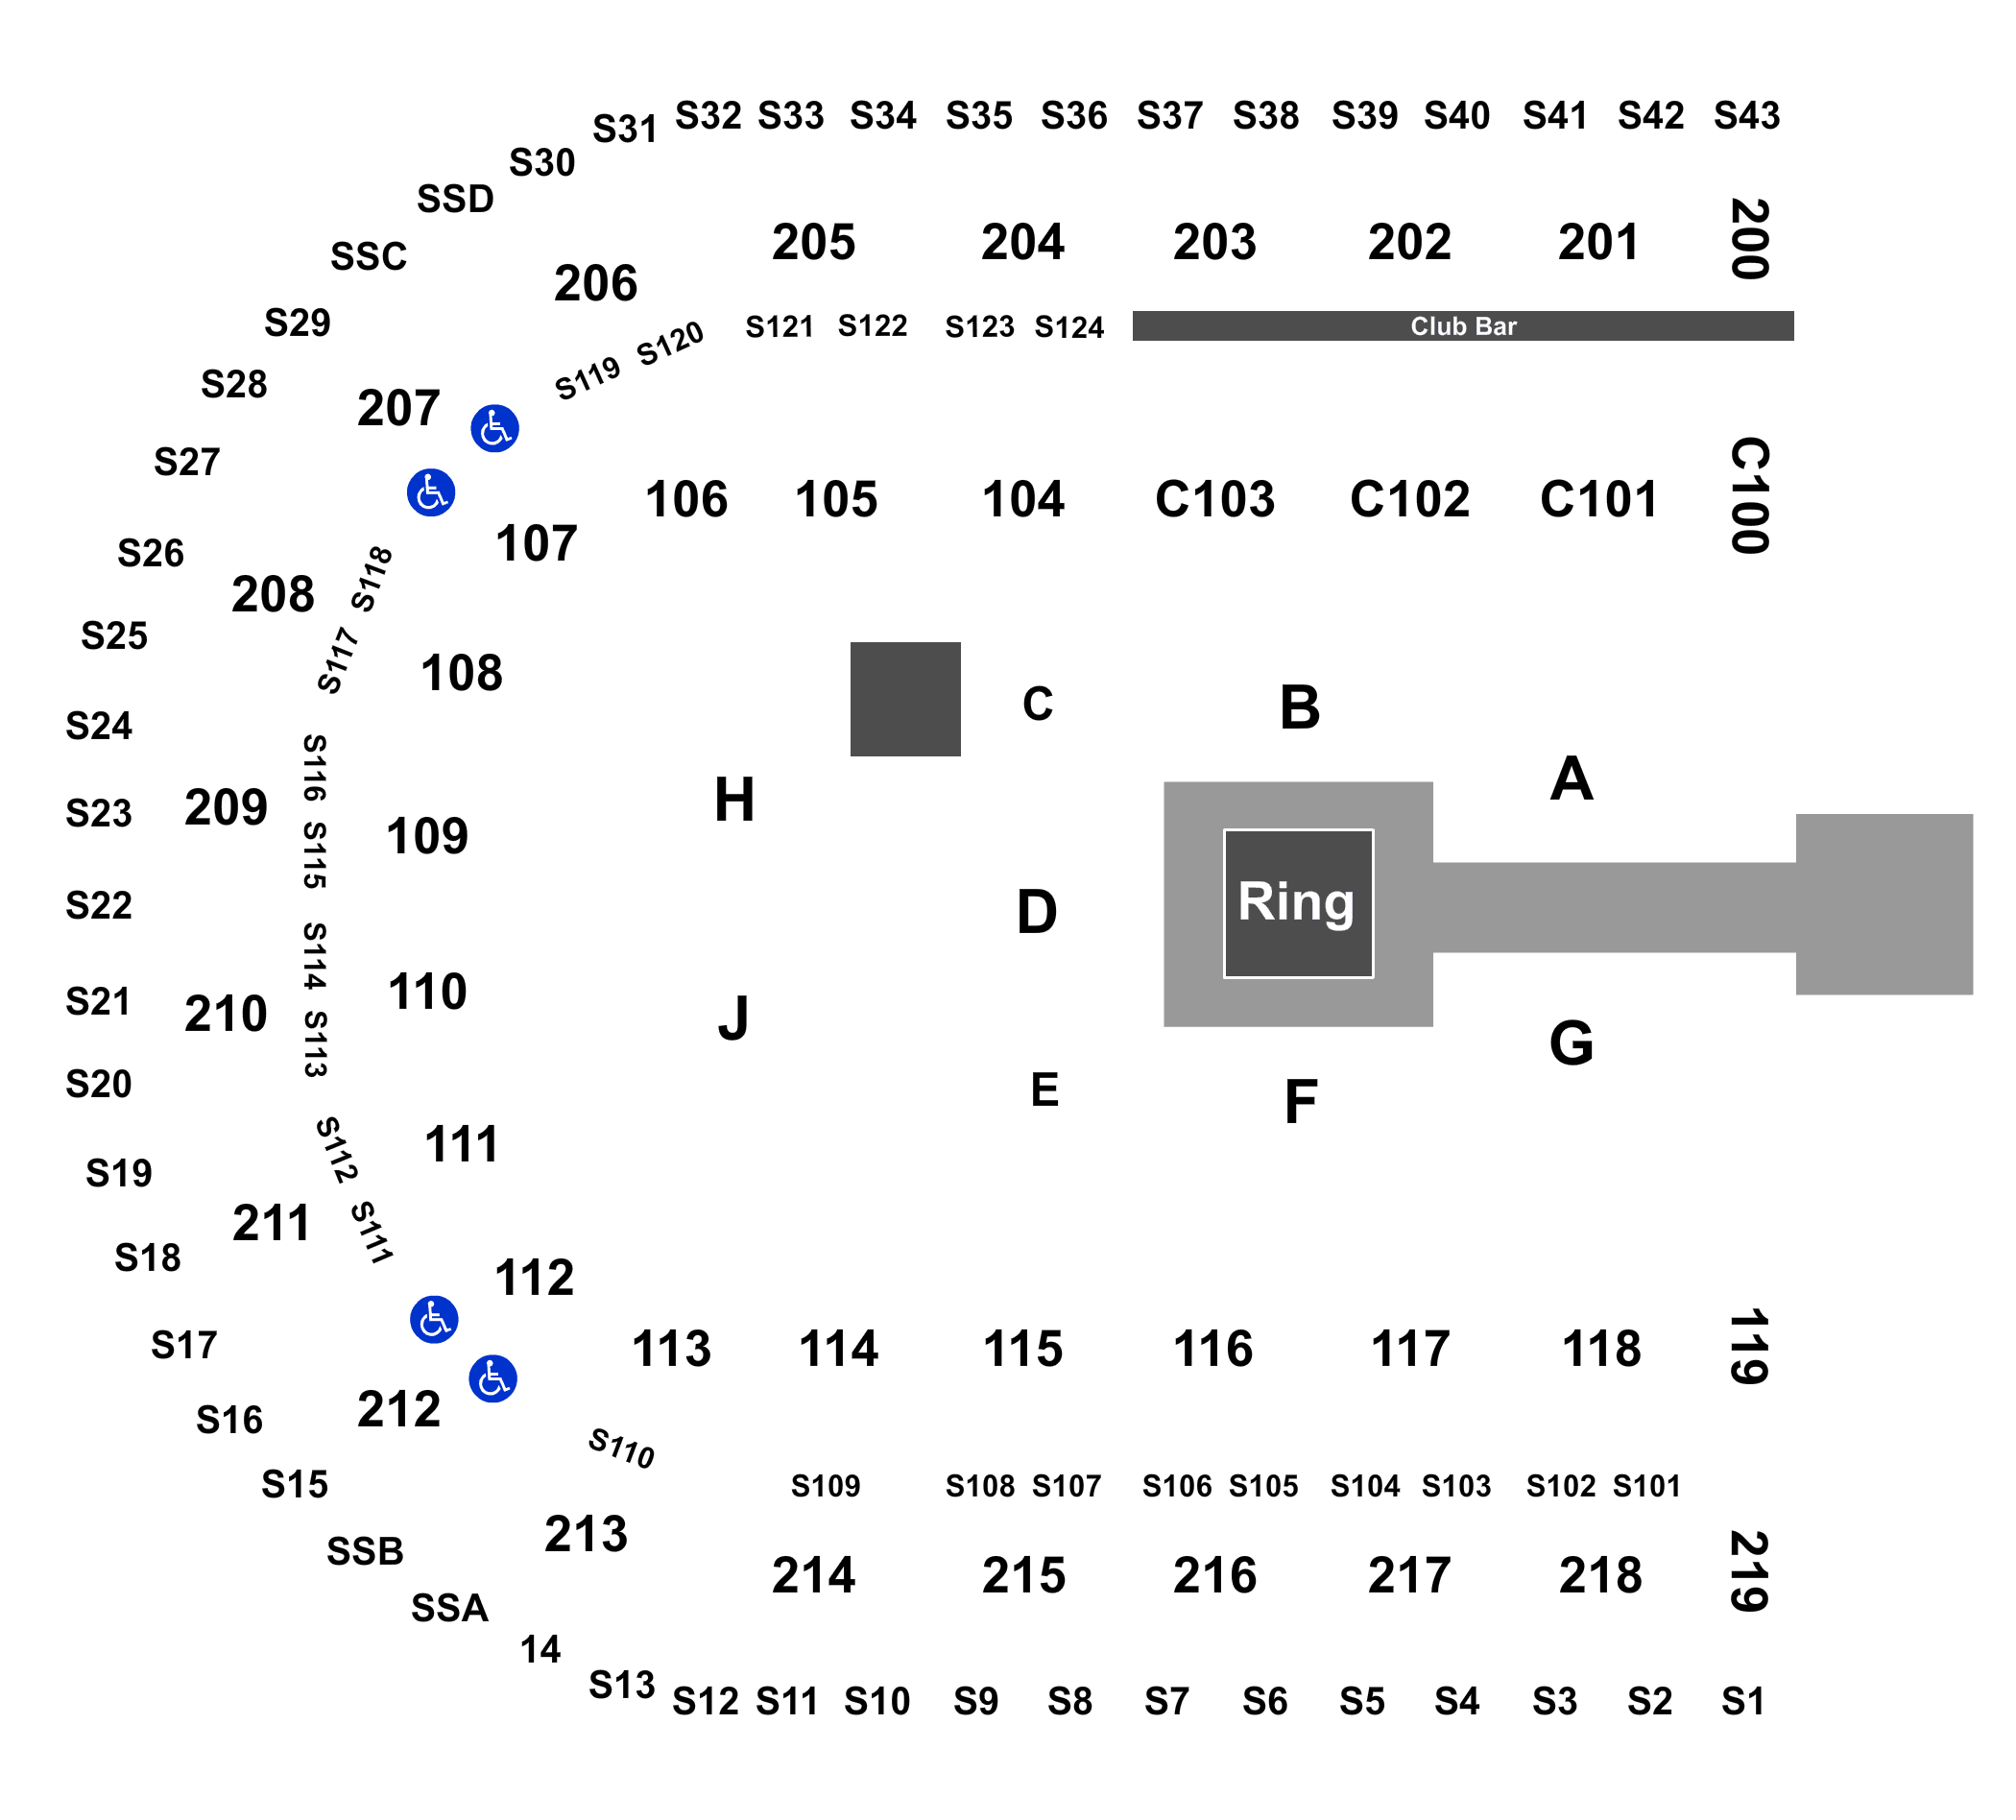 Sears Centre Seating Chart Hoffman Estates